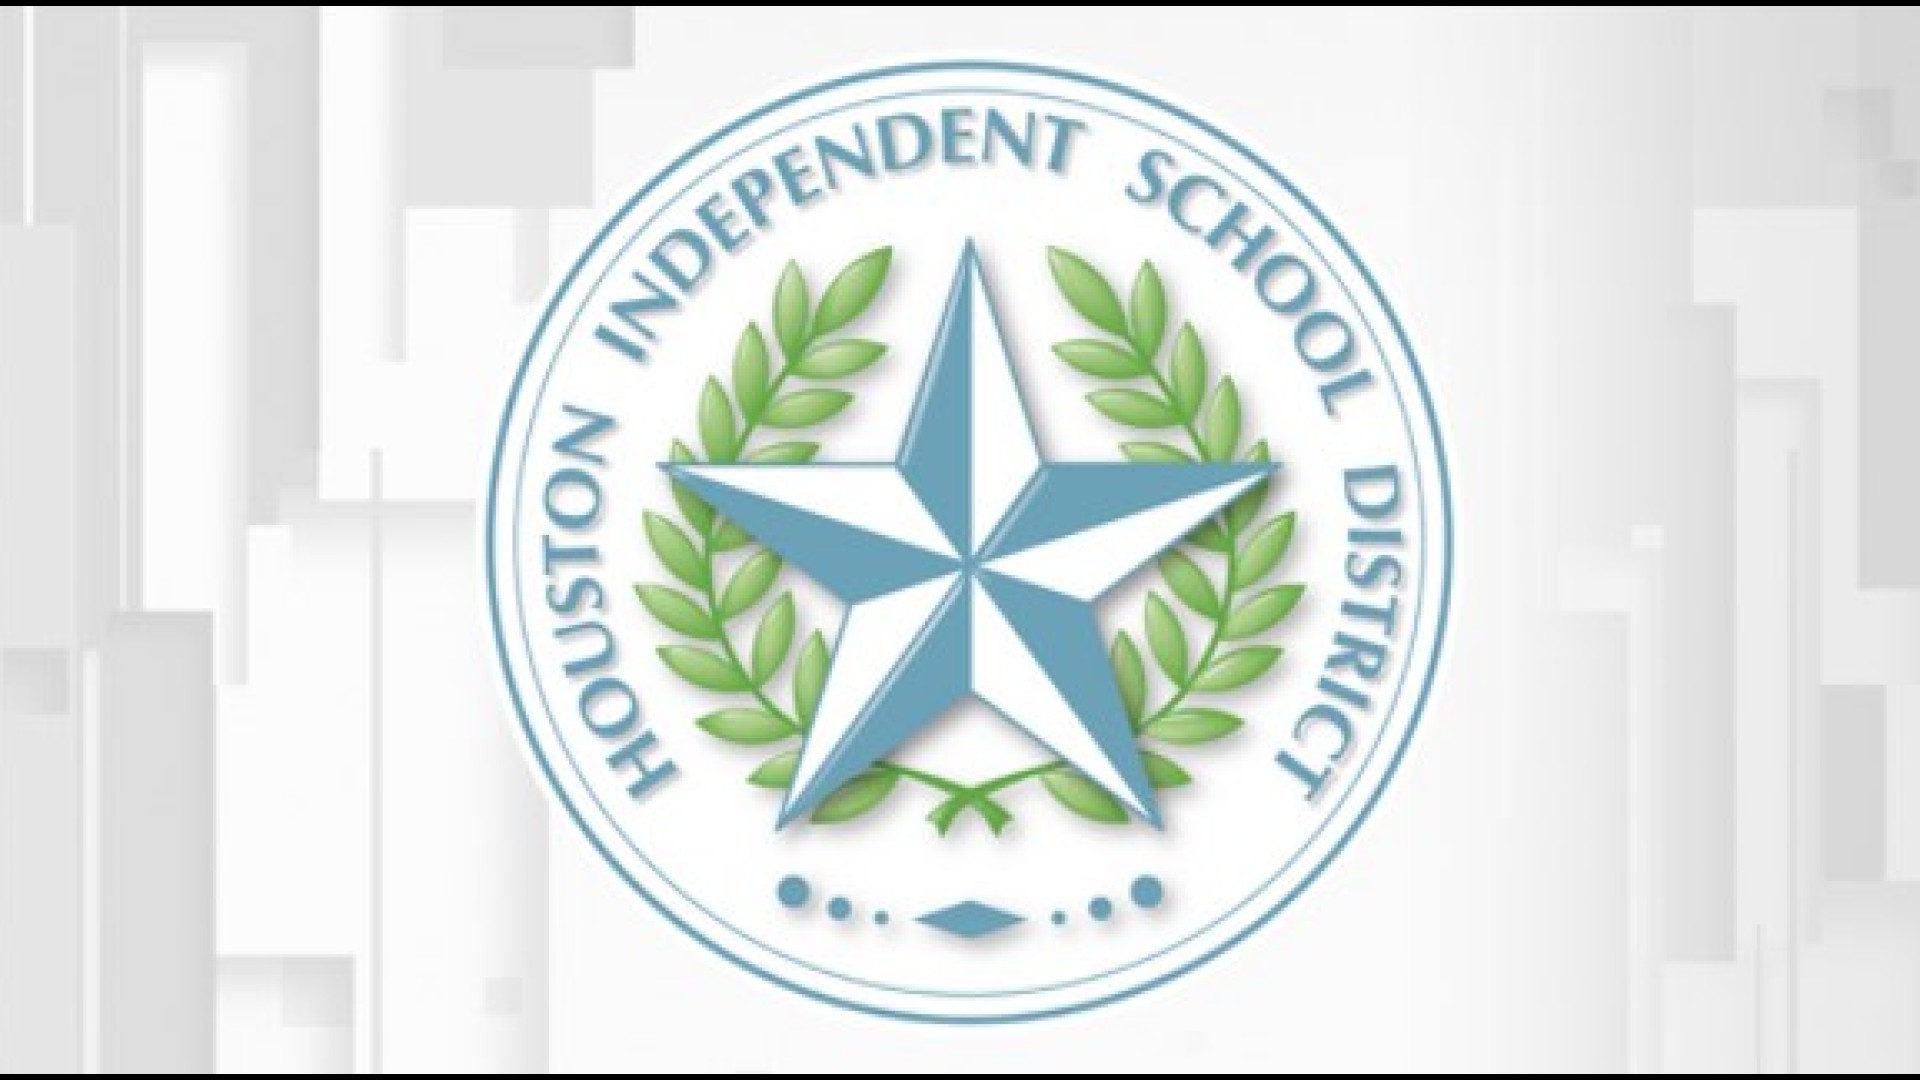 15 improvement now required for STAAR test scores after HISD board vote